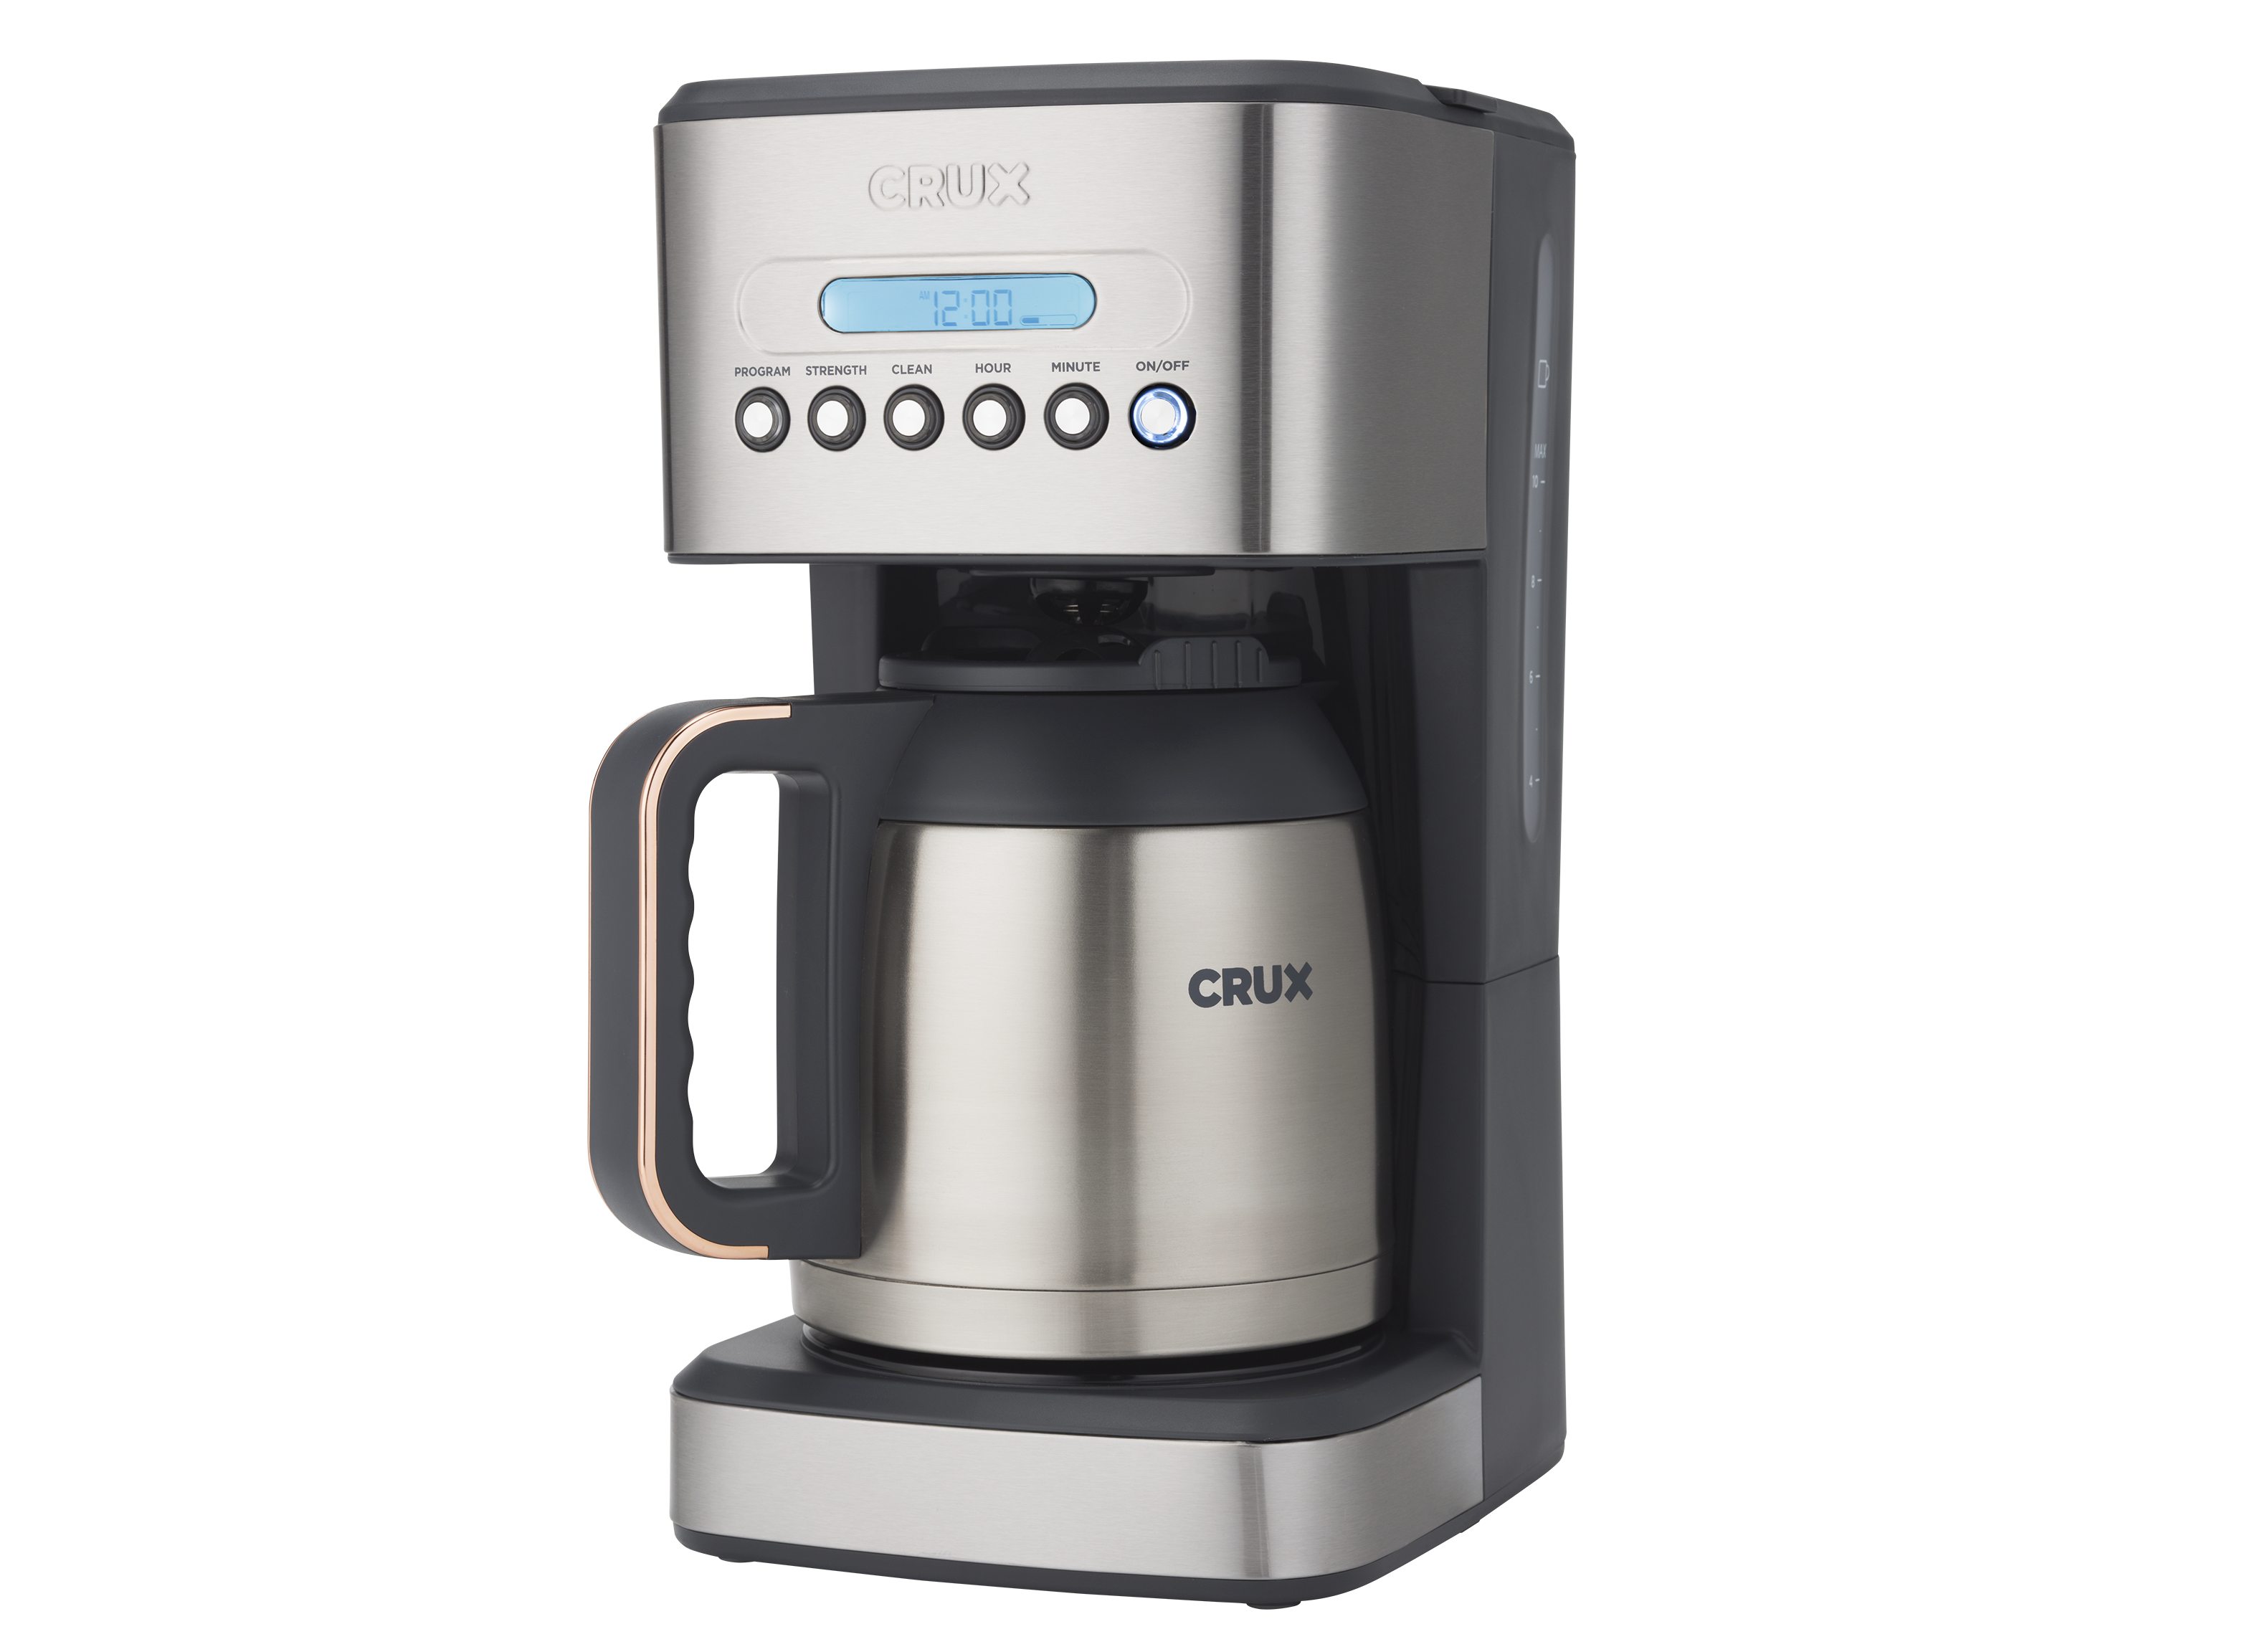 https://crdms.images.consumerreports.org/prod/products/cr/models/388207-coffeemakers-crux-crx14541.png